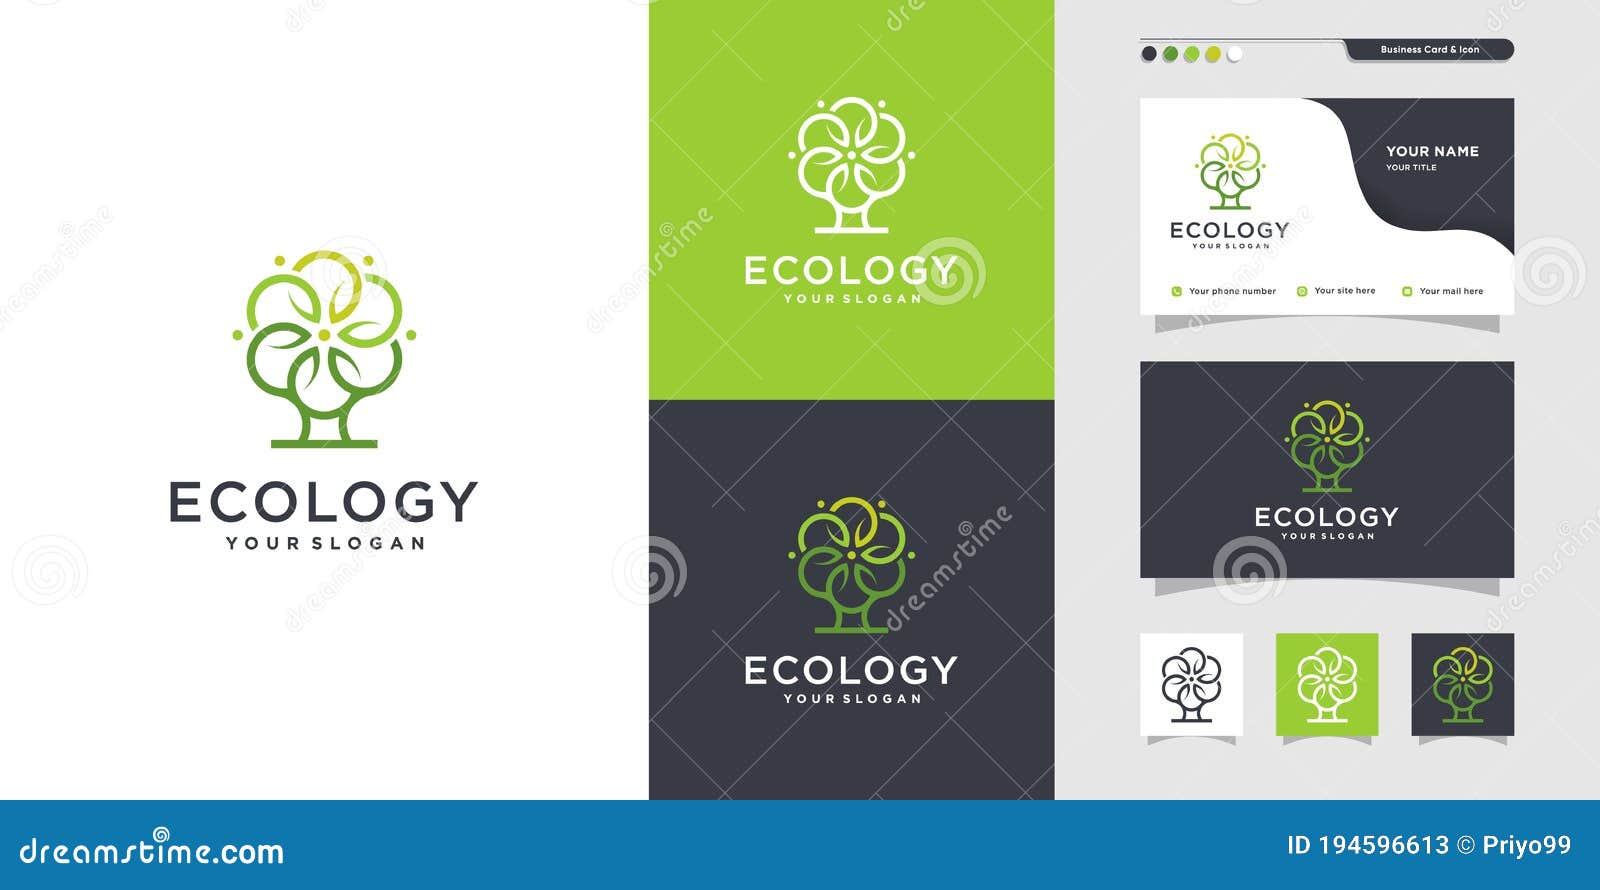 Unique Ecology Logo and Business Card Design. Health, Care, Live, Life,  Icon Premium Vector Stock Vector - Illustration of icon, green: 194596613